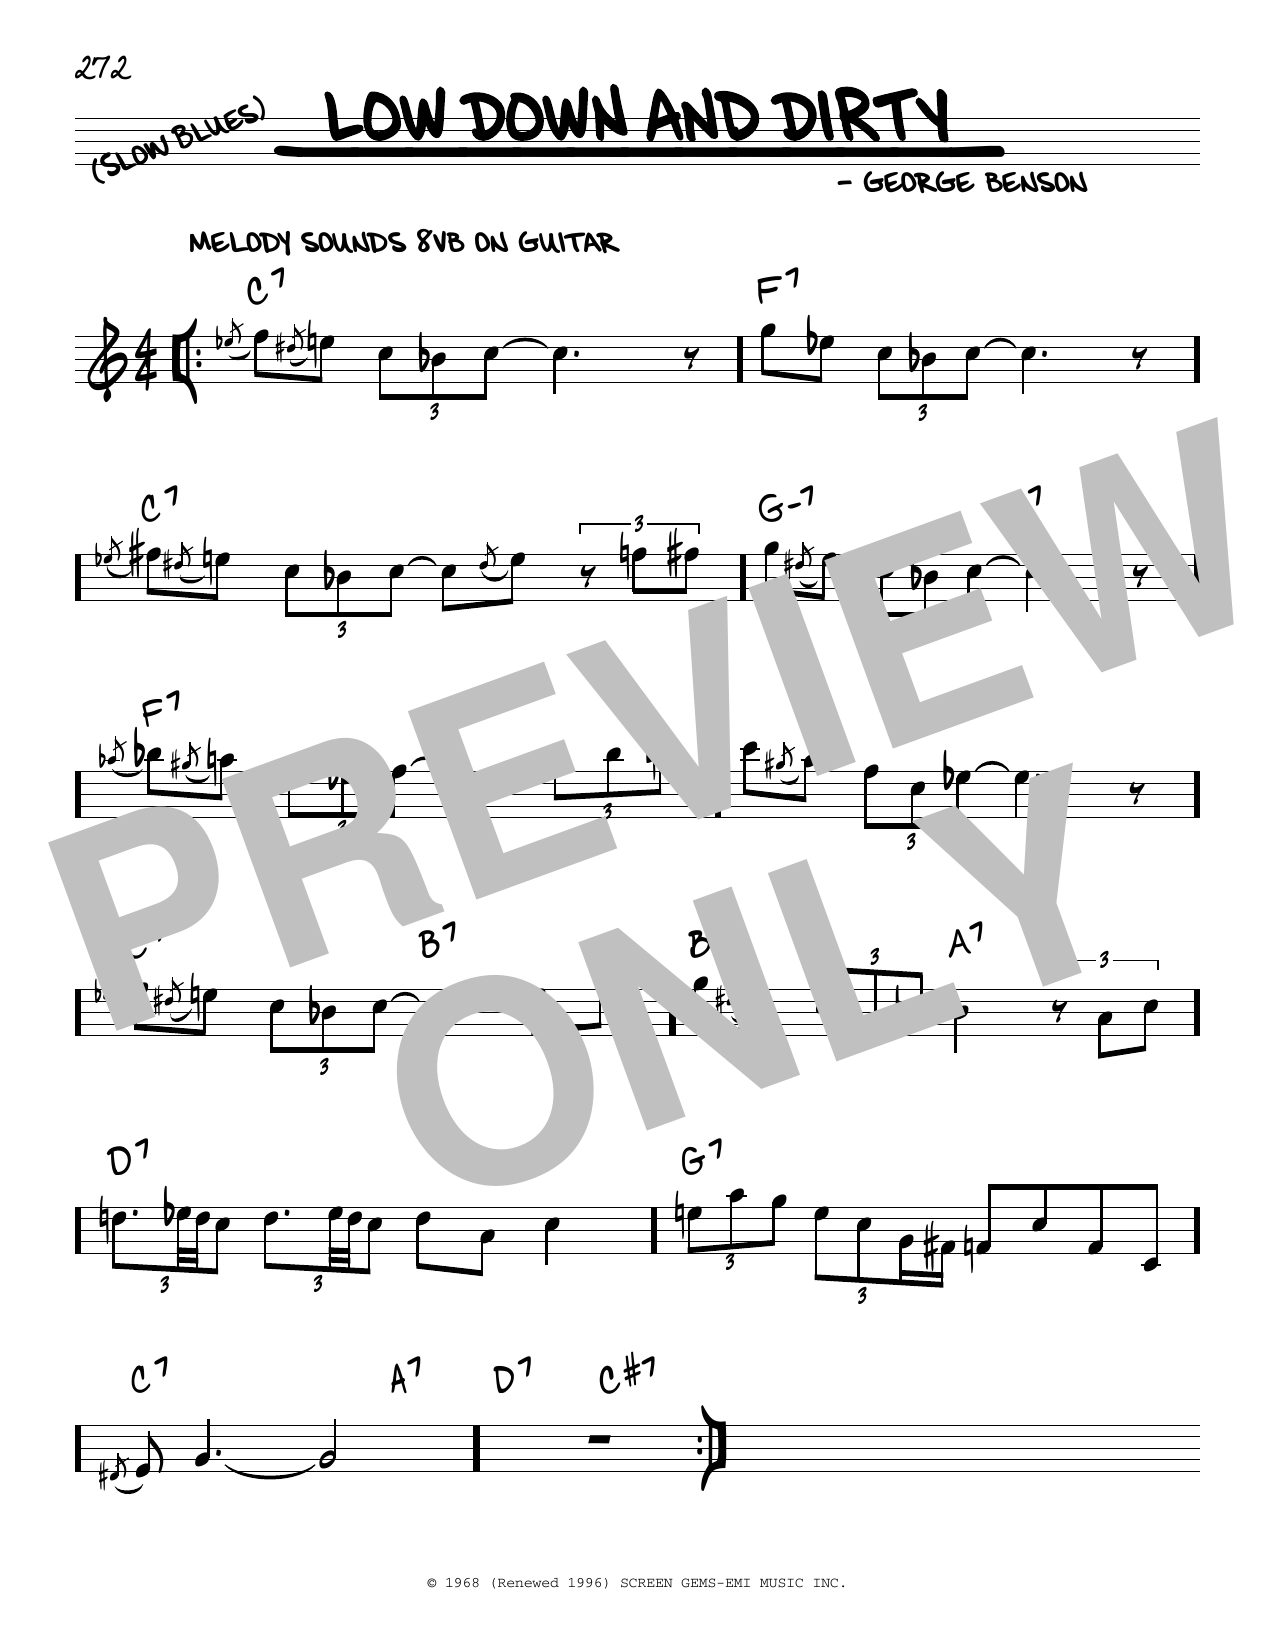 Download George Benson Low Down And Dirty Sheet Music